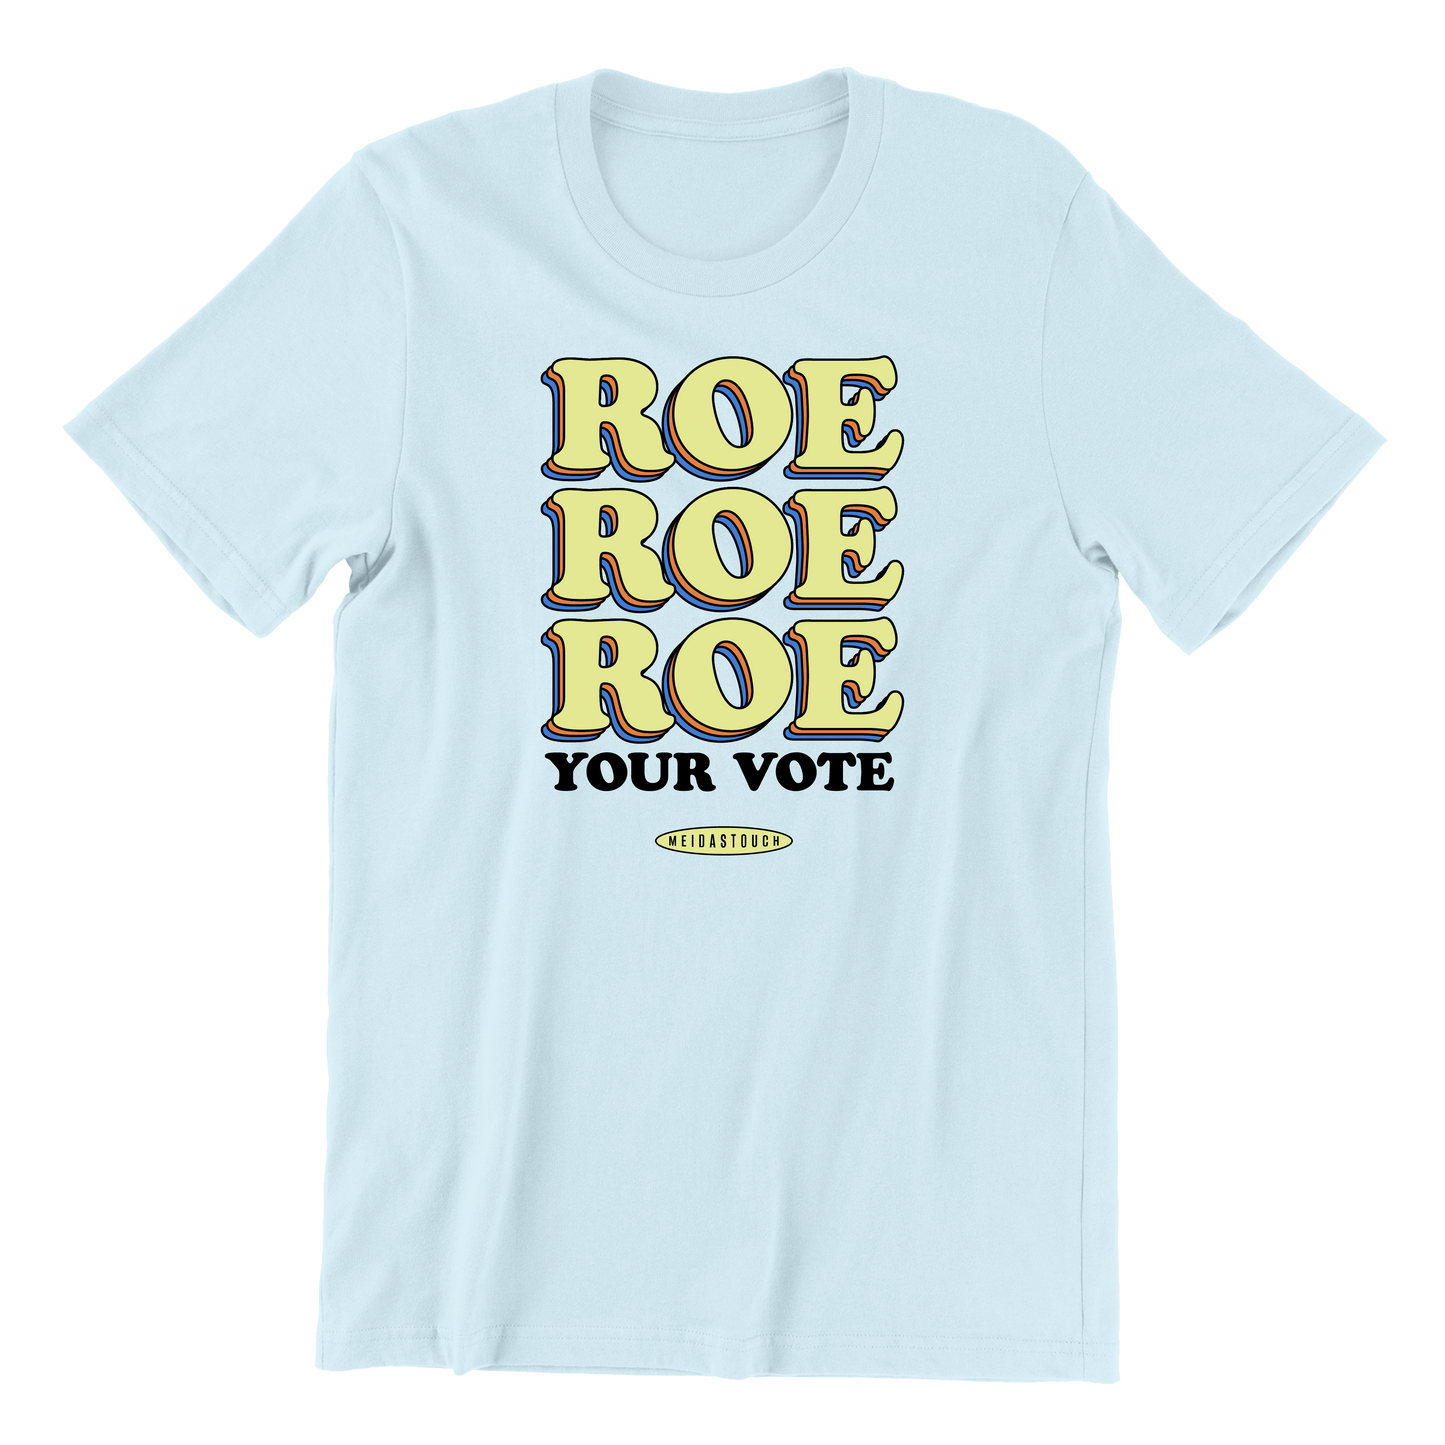 Roe Your Vote Tee